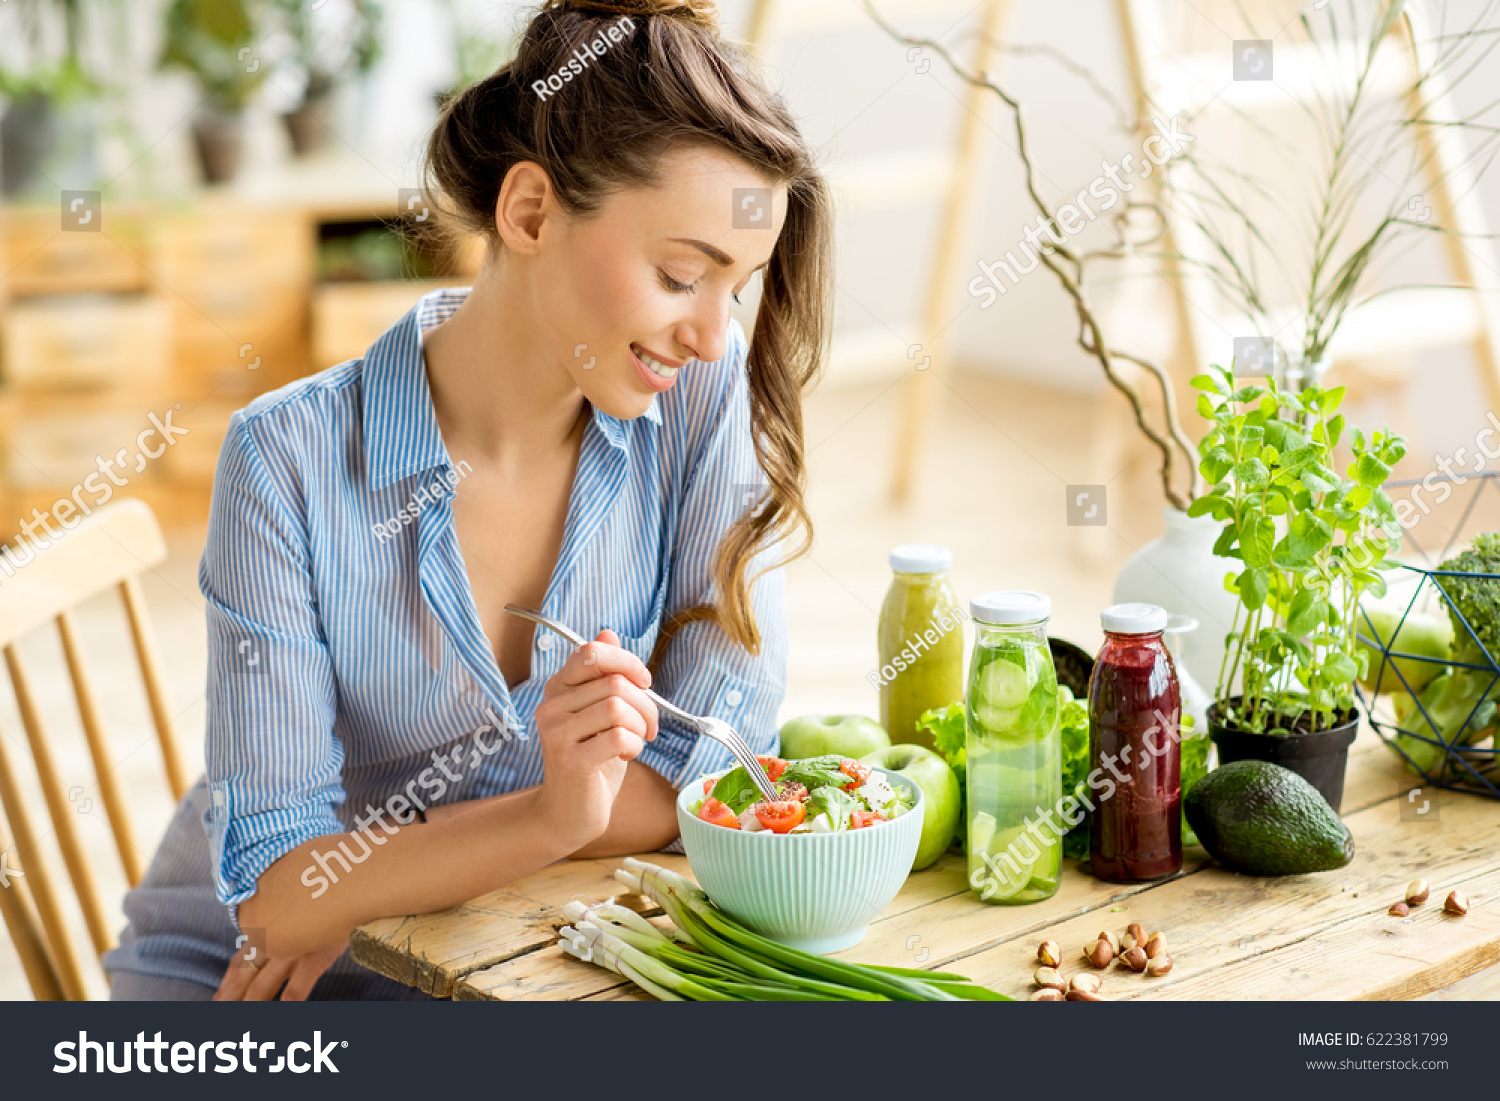 Young and happy woman eating healthy salad sitting on the table with green fresh ingredients indoors #622381799